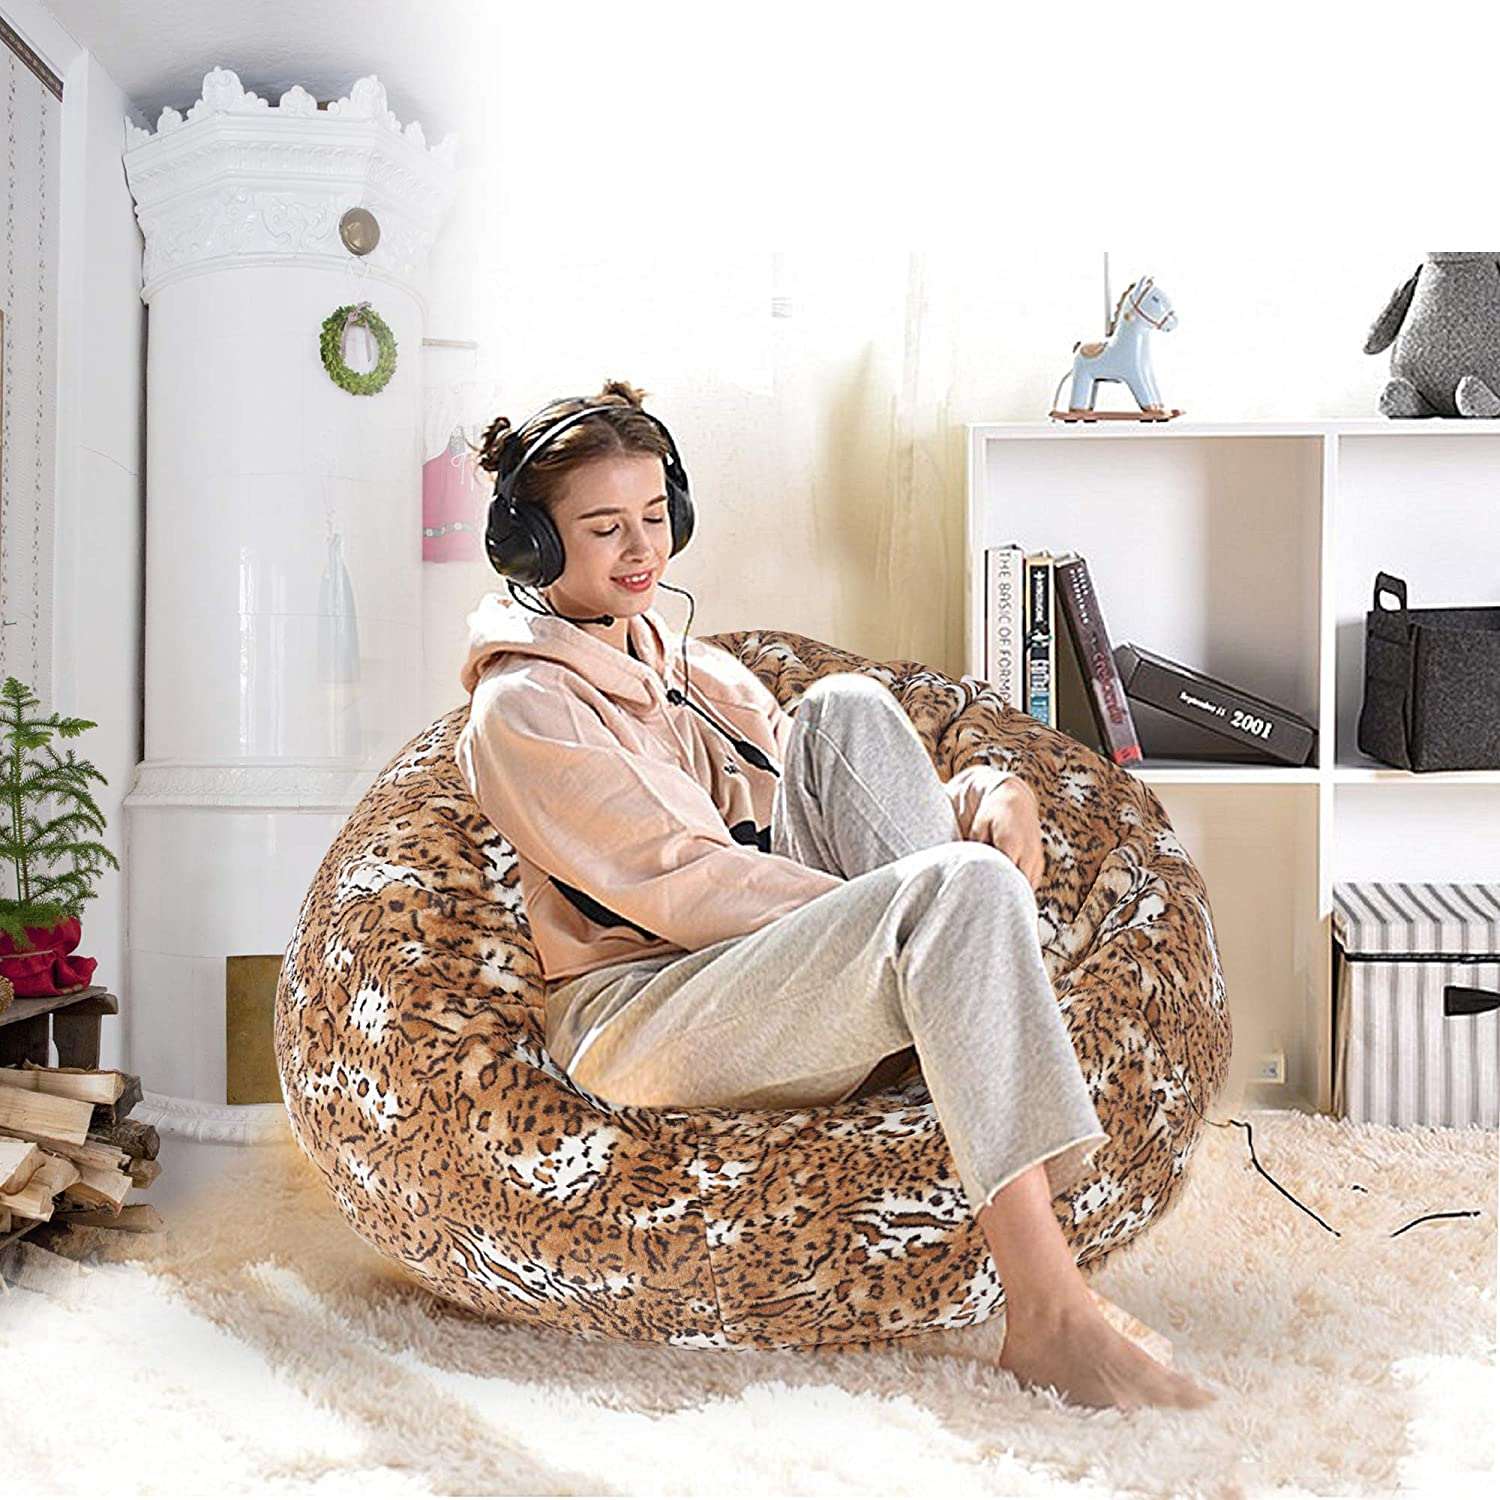 Big Plush Bean Bag Chair,Comfy Furry Lounger Sofa Seat with Detachable Covers,Luxury Memory Sponge Filled Furniture Leopard Print